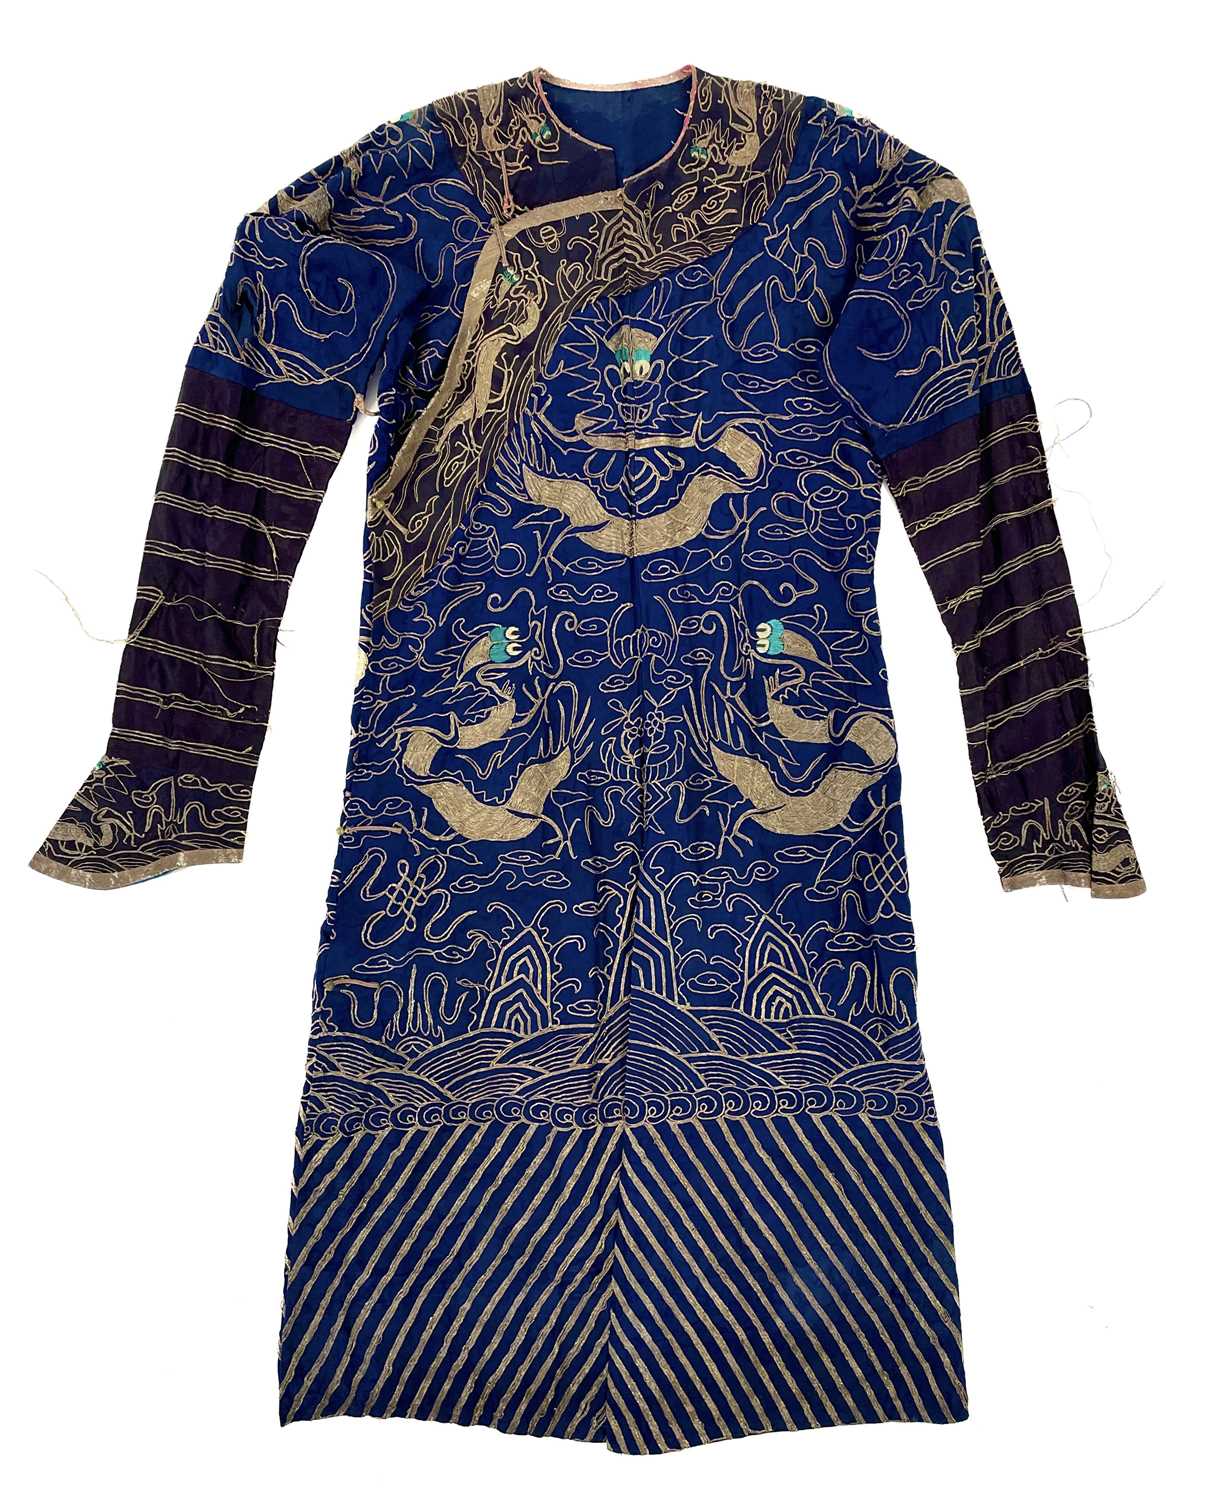 Lot 44 - A Chinese gold metal thread embroidered dragon robe, early 20th century.